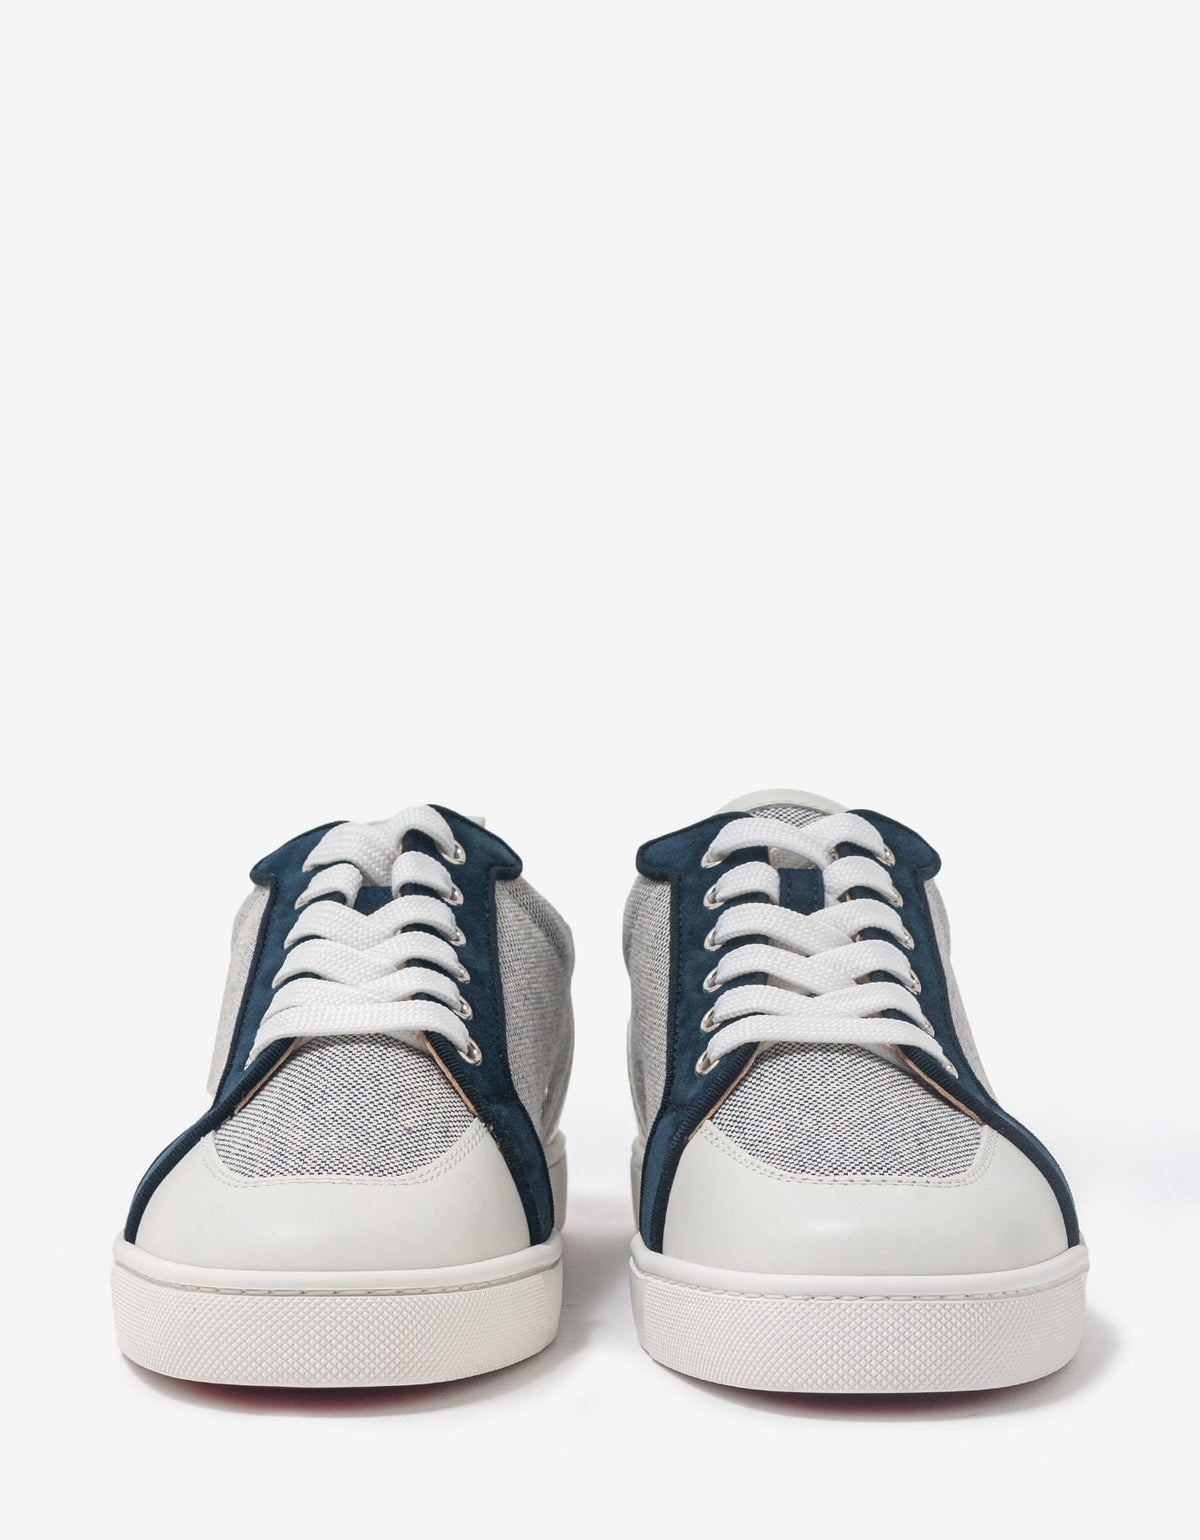 Christian Louboutin Rantulow Flat Navy Blue and & White Trainers -